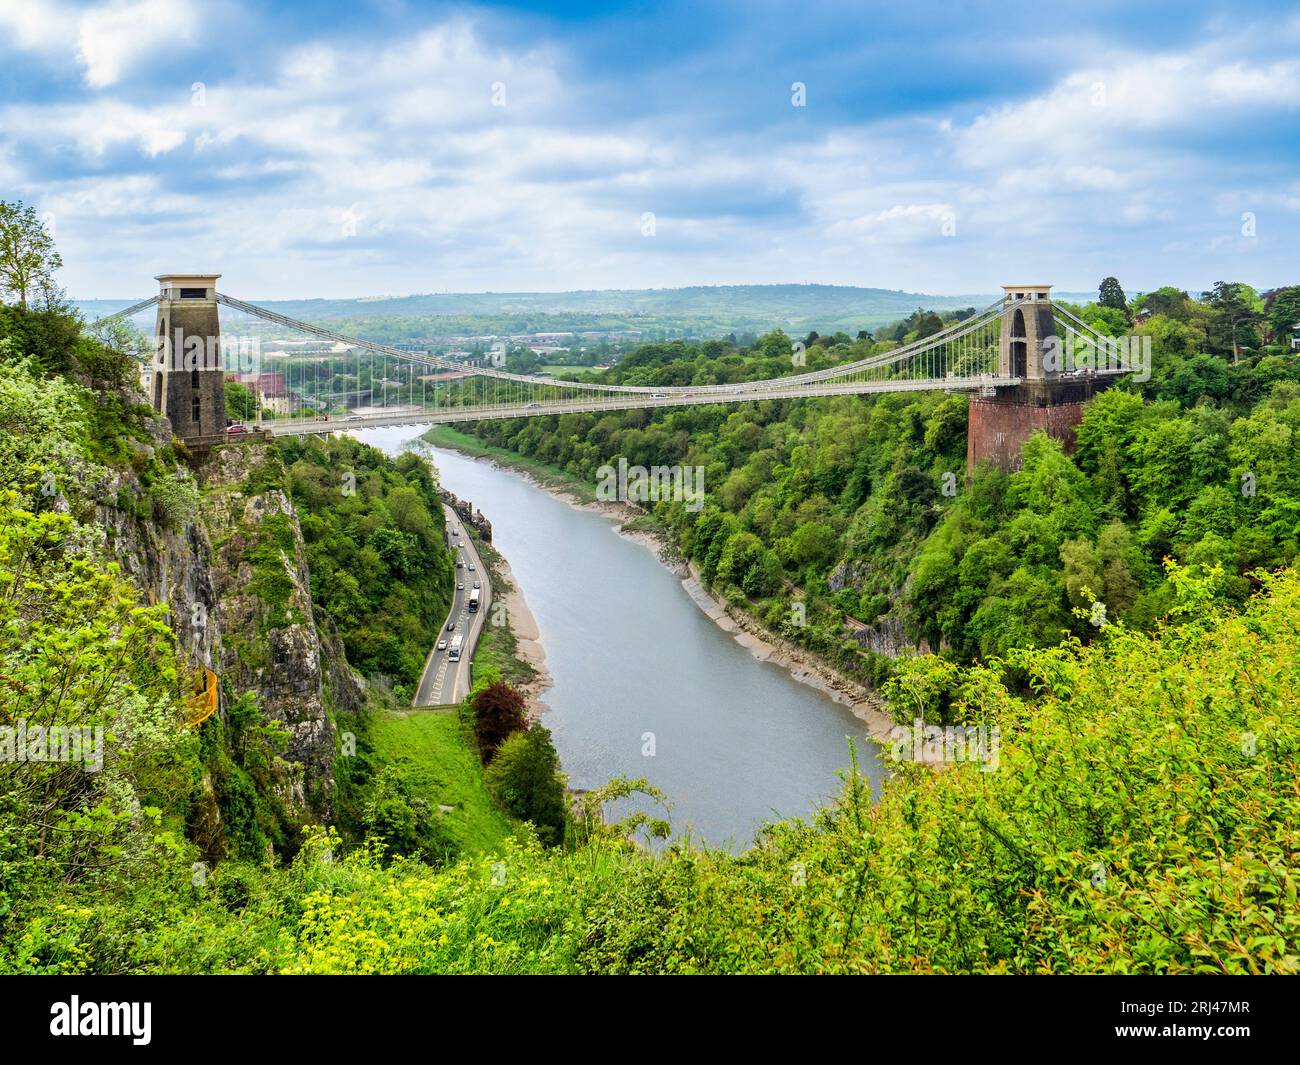 Clifton Suspension Bridge, designed by I K Brunel, crossing the Avon Gorge downstream from central Bristol. Stock Photo